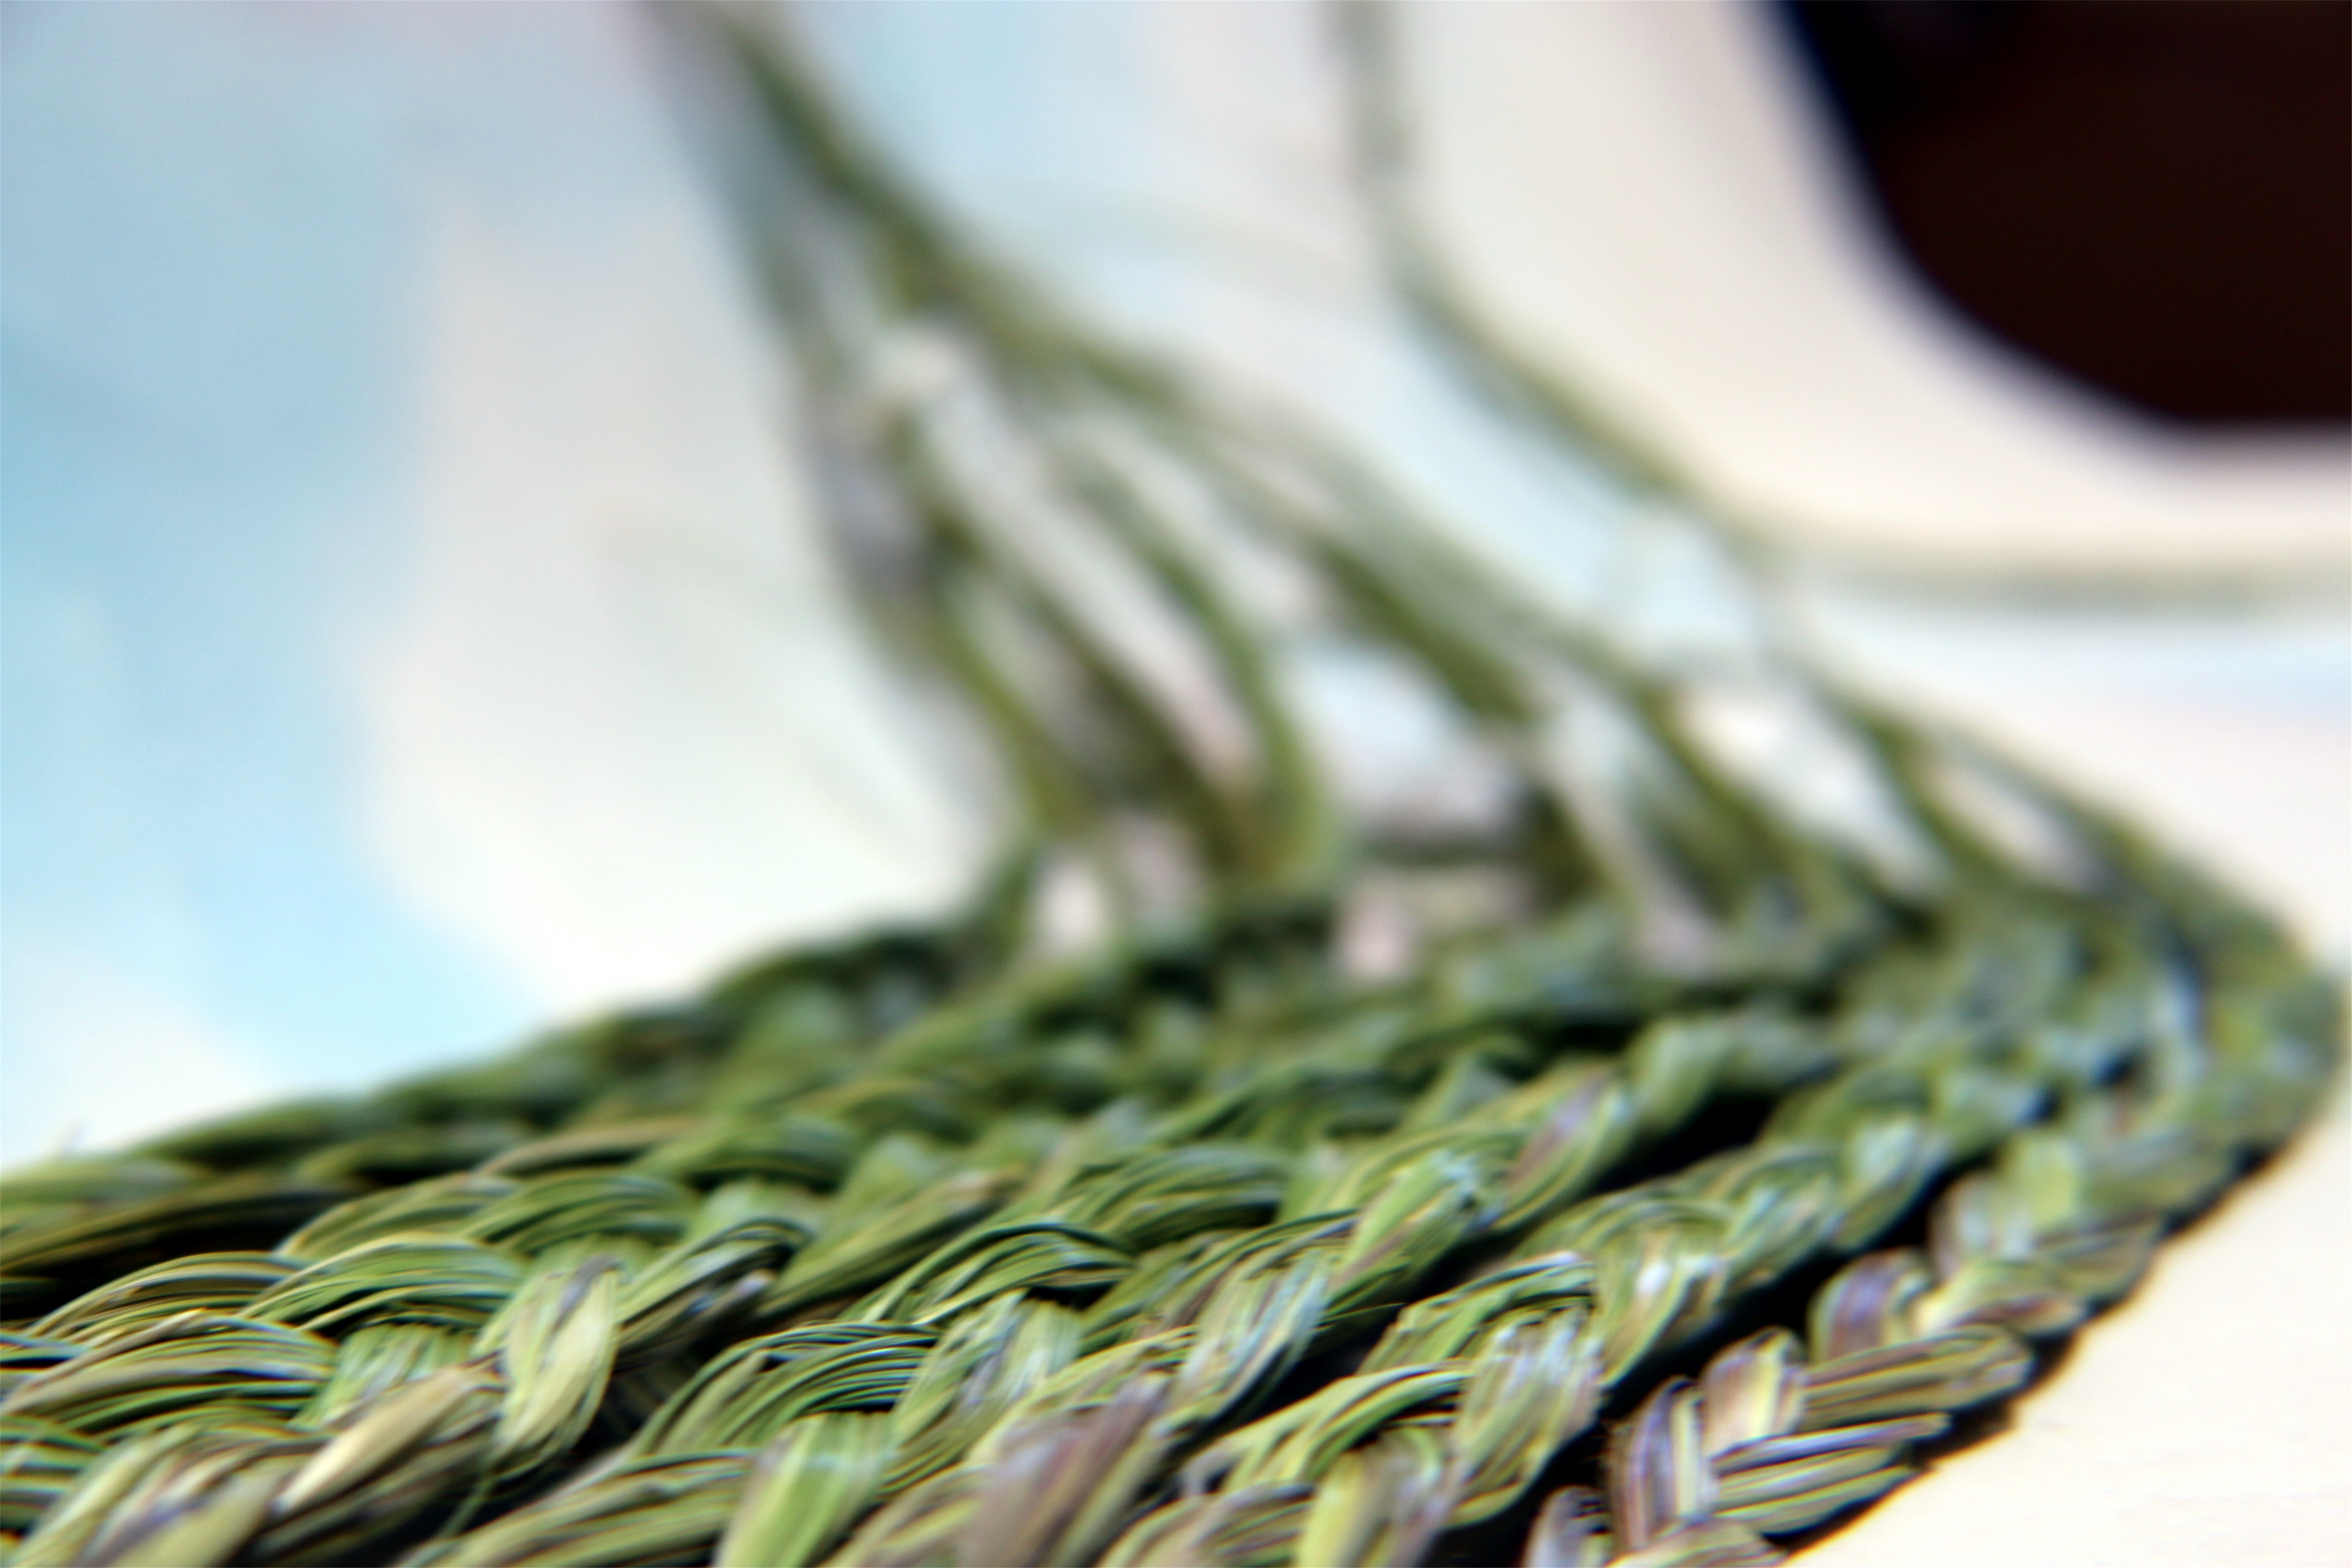 Sweet Grass Braid: SweetGrass, Native Source, Holy Grass (Lrg 25-32)+  Instructions. Cleanse, Purify, Set Intentions